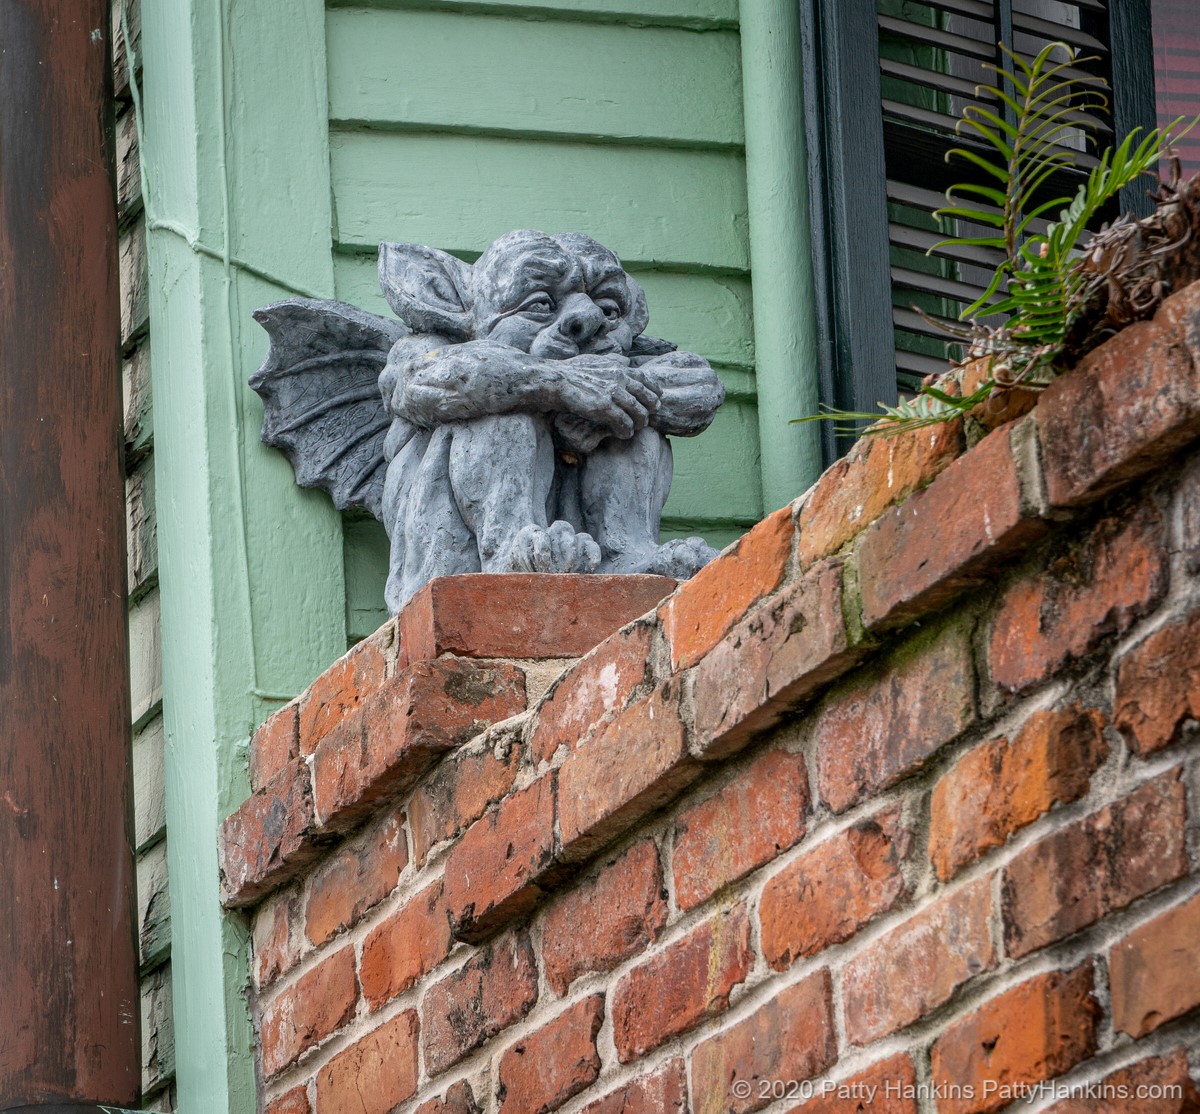 Details in the French Quarter of New Orleans